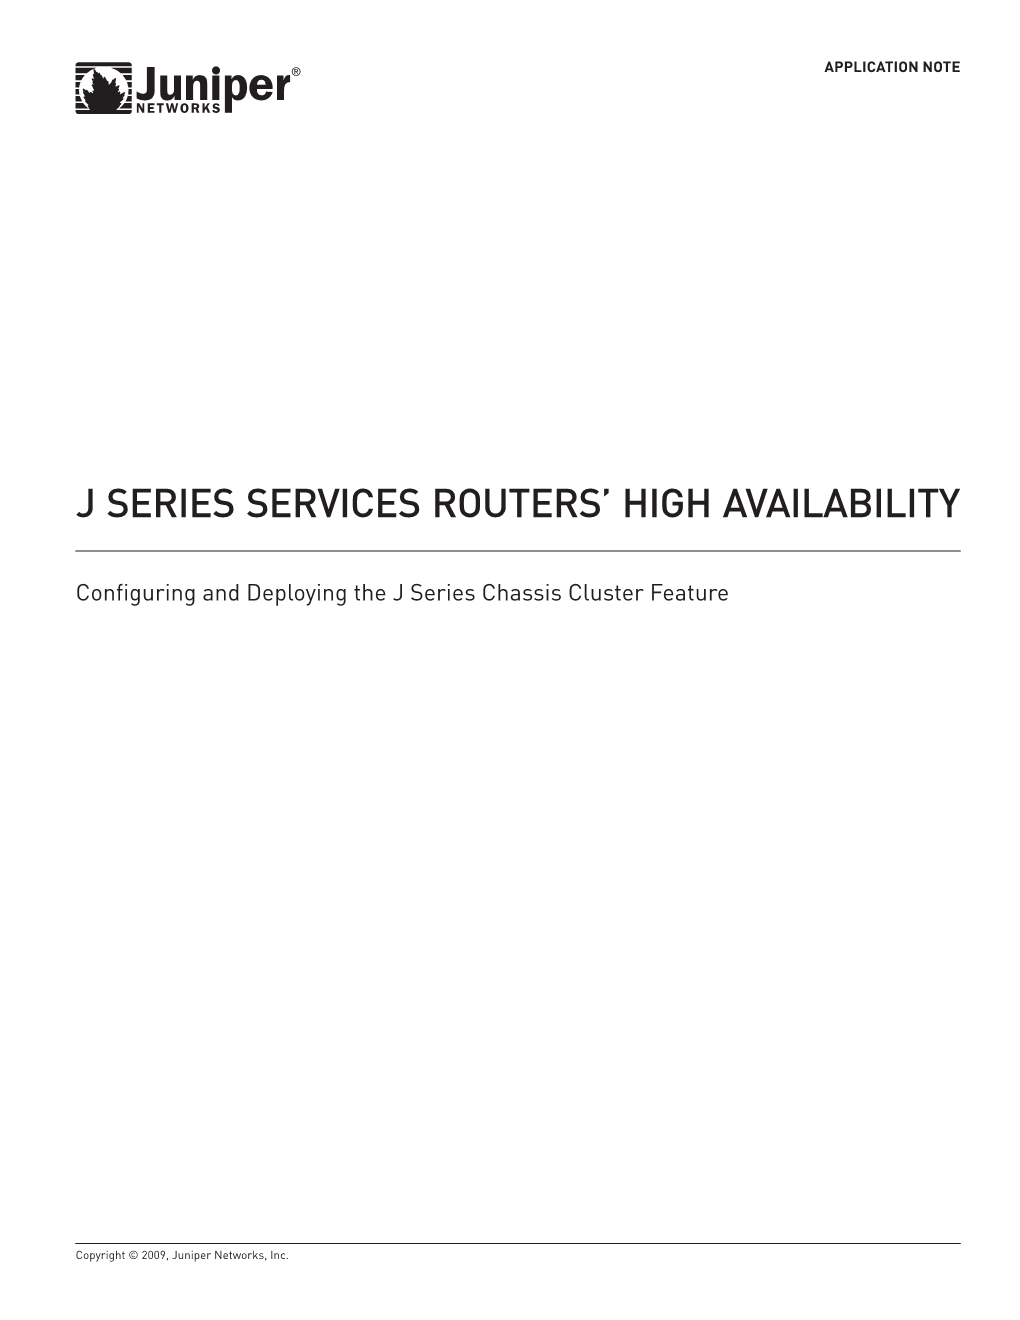 J Series Services Routers' High Availability